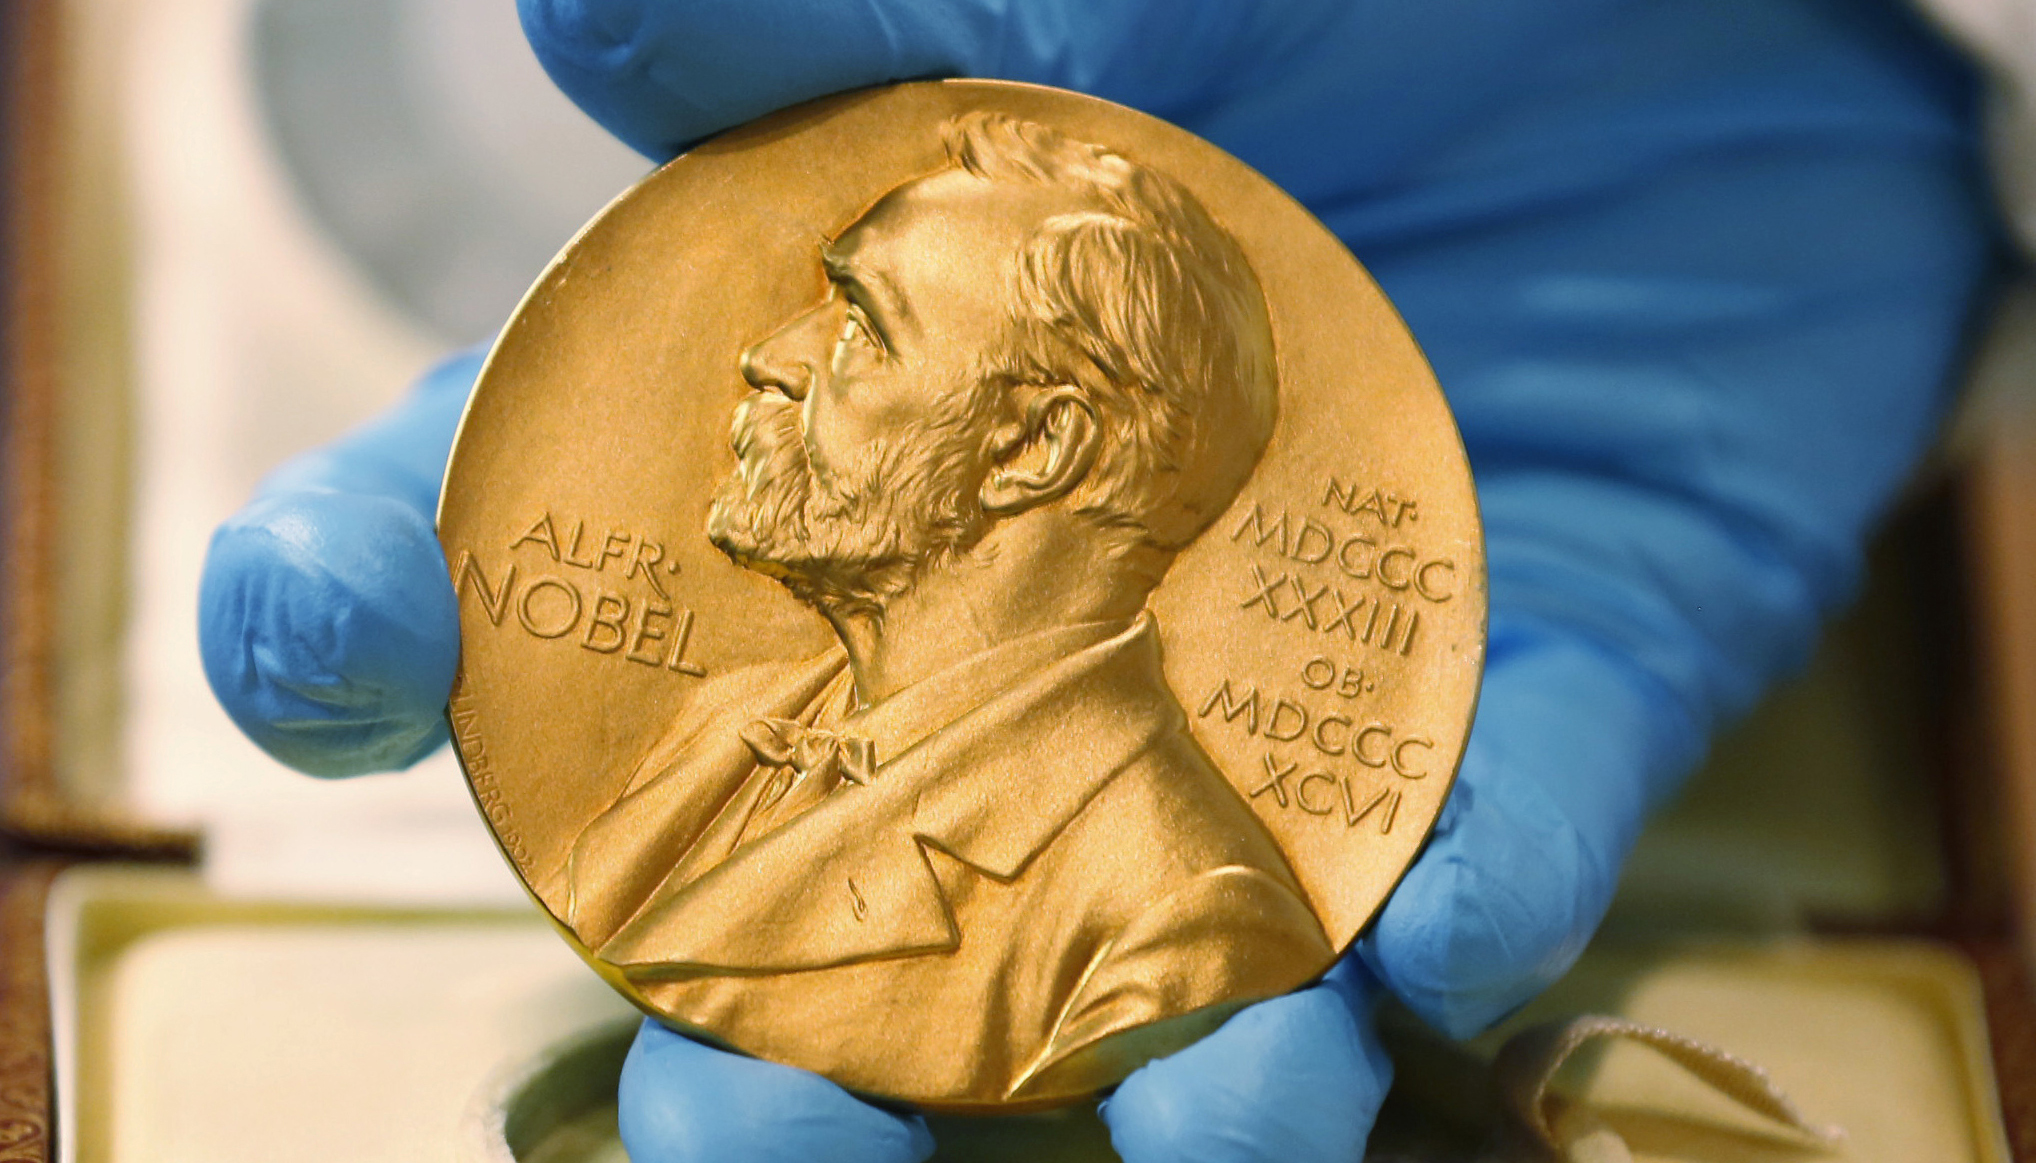 EXPLAINER: How Nobel Peace Prize nominations come about